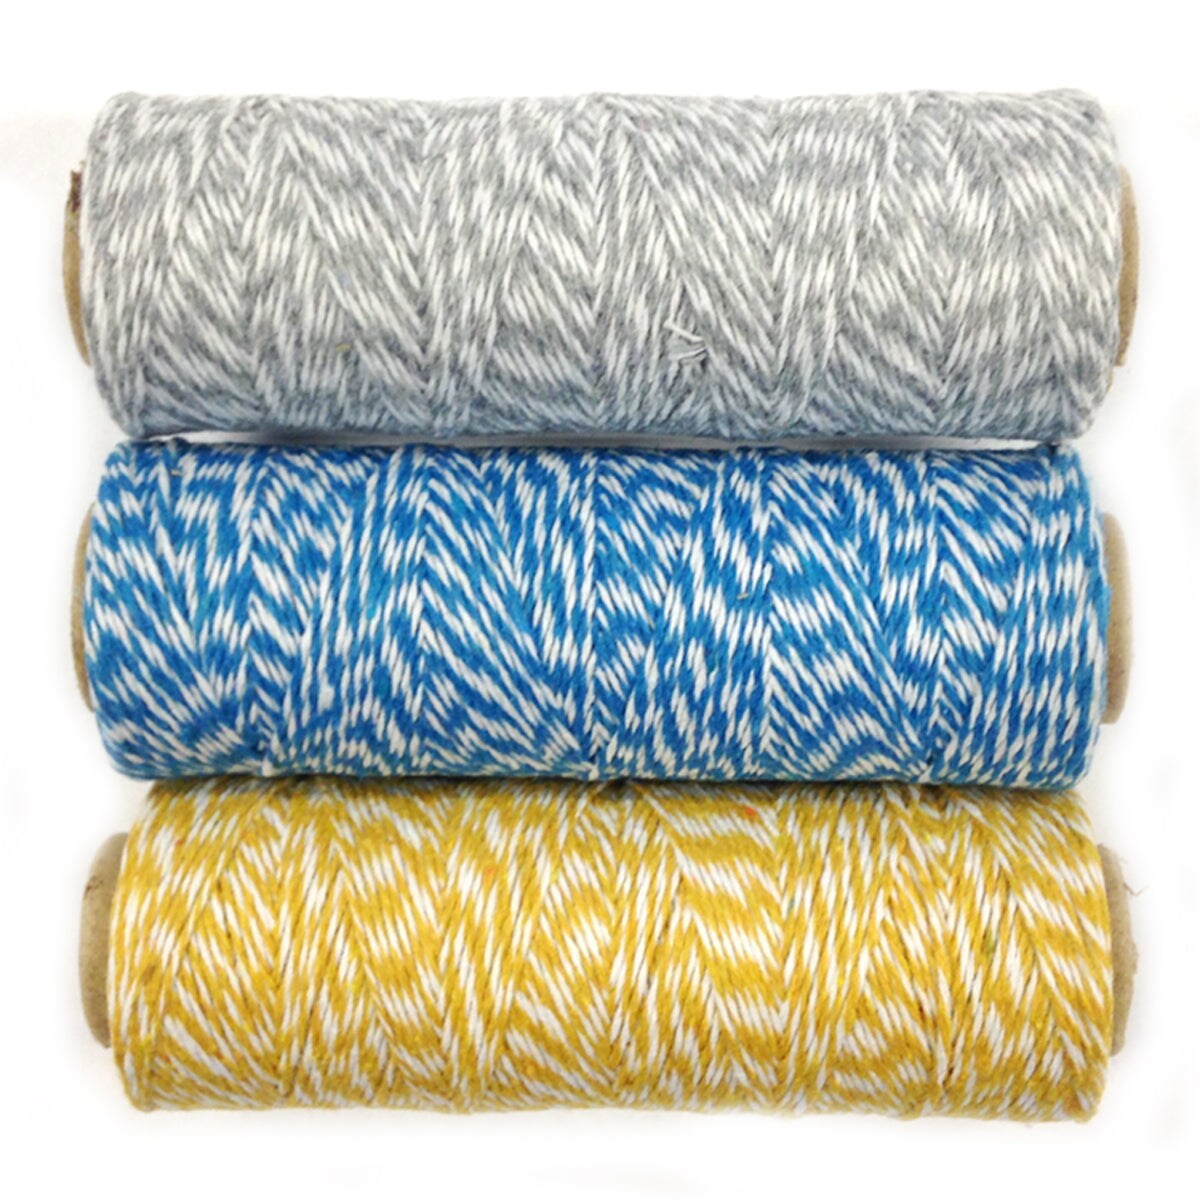 Wrapables Cotton Baker&#x27;s Twine 4ply 330 Yards (Set of 3 Spools x 110 Yards) for Gift Wrapping, Party Decor, and Arts and Craft (Grey, Blue, Dark Yellow)